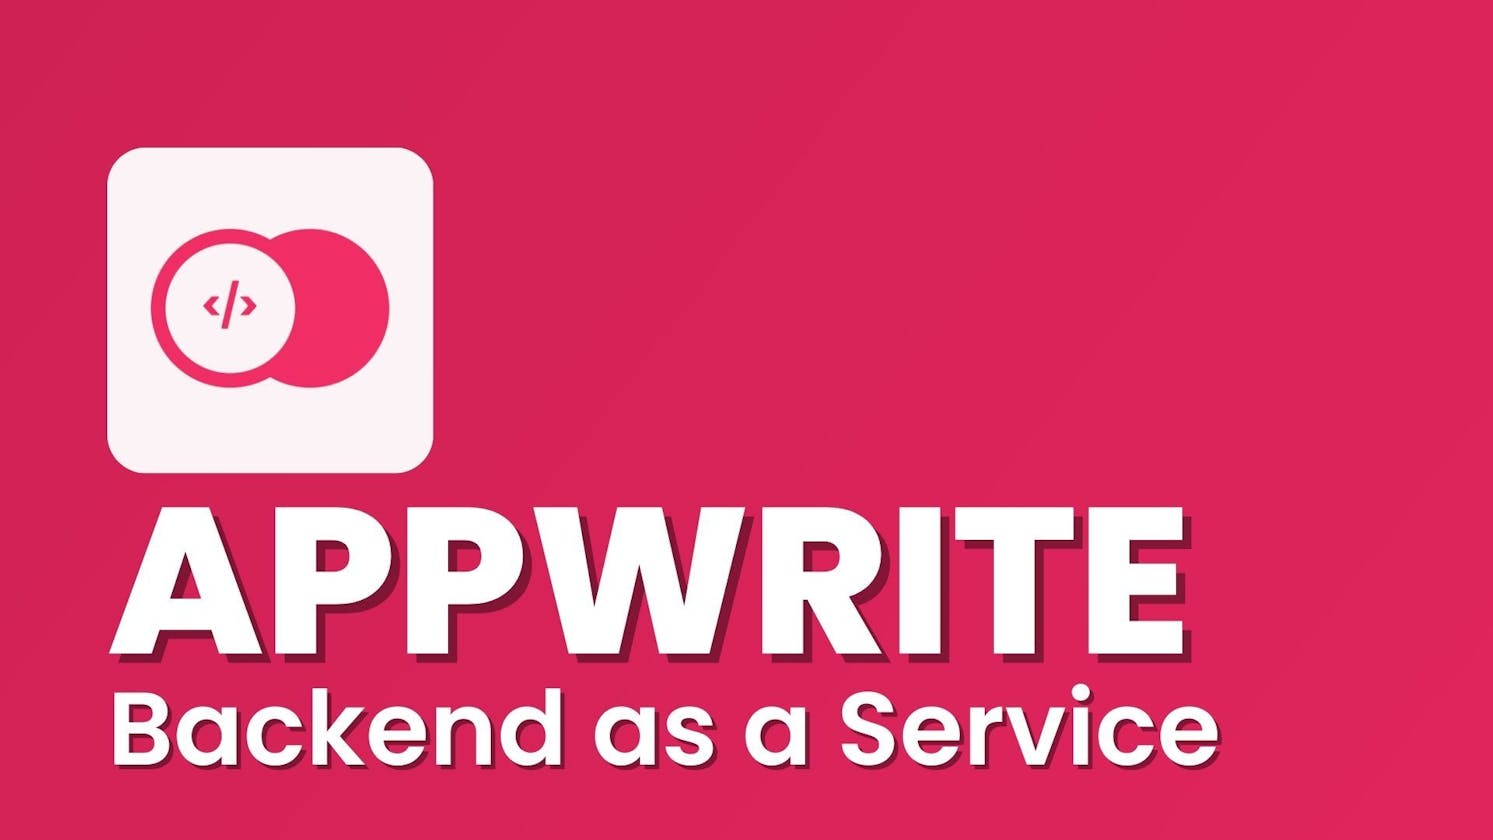 How to use Appwrite as a backend service: Buiding a chat app with Appwrite